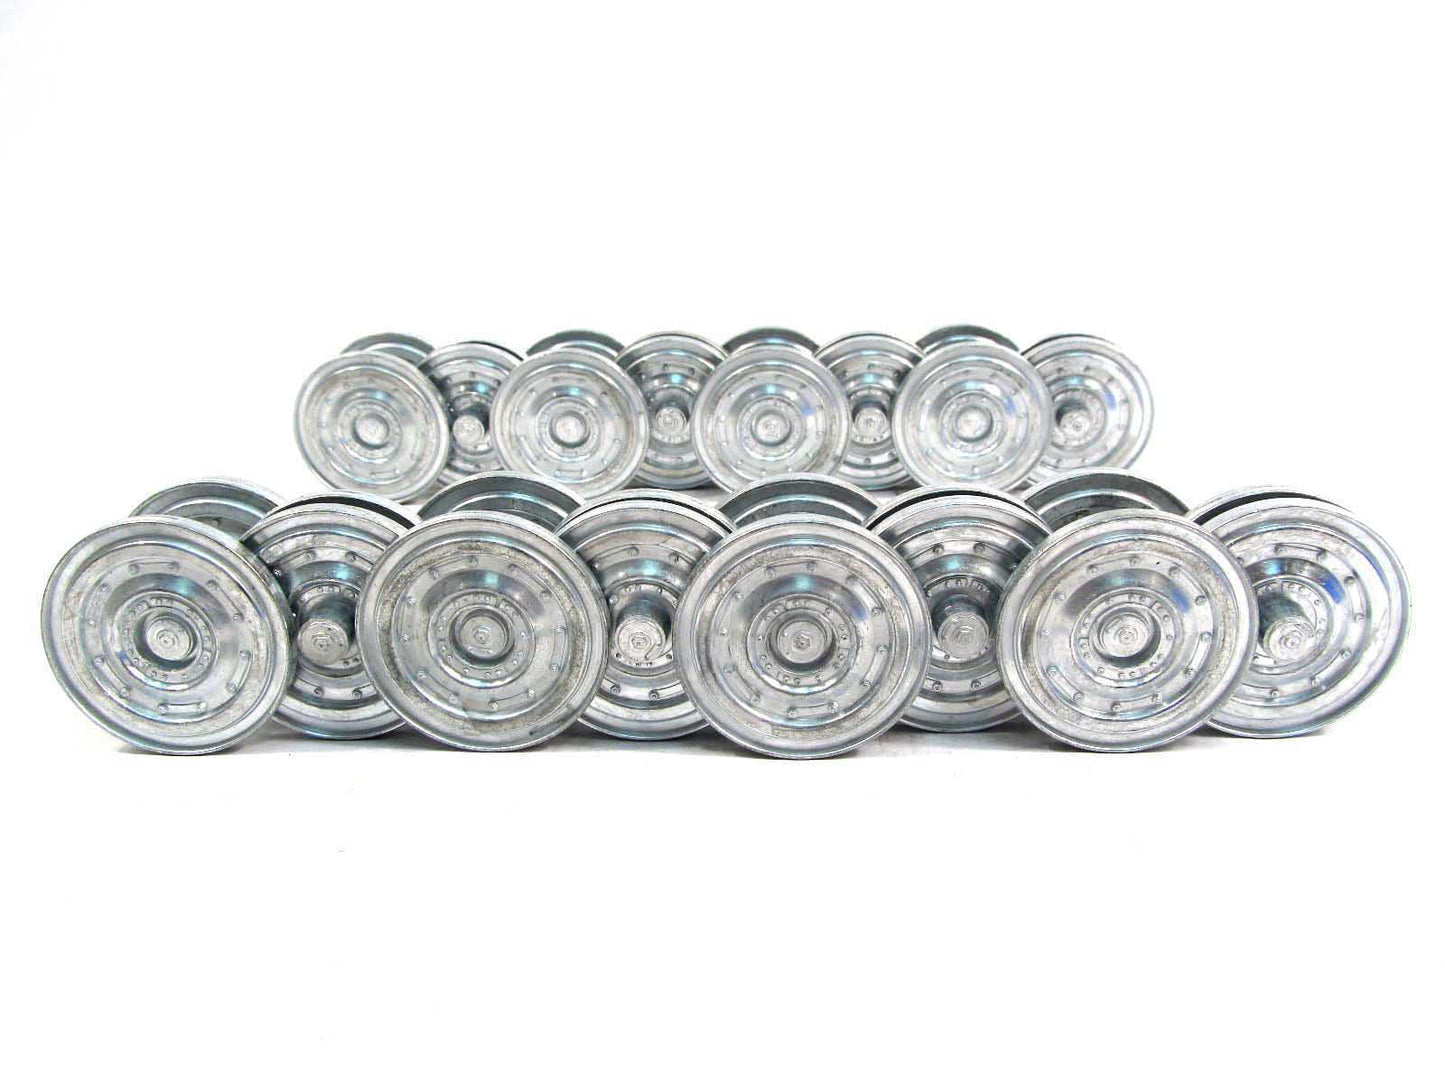 US Stock Mato Spare Part Metal Road Wheels Set Late Version MT154 for 1:16 Scale German Tiger I RC Tank Model